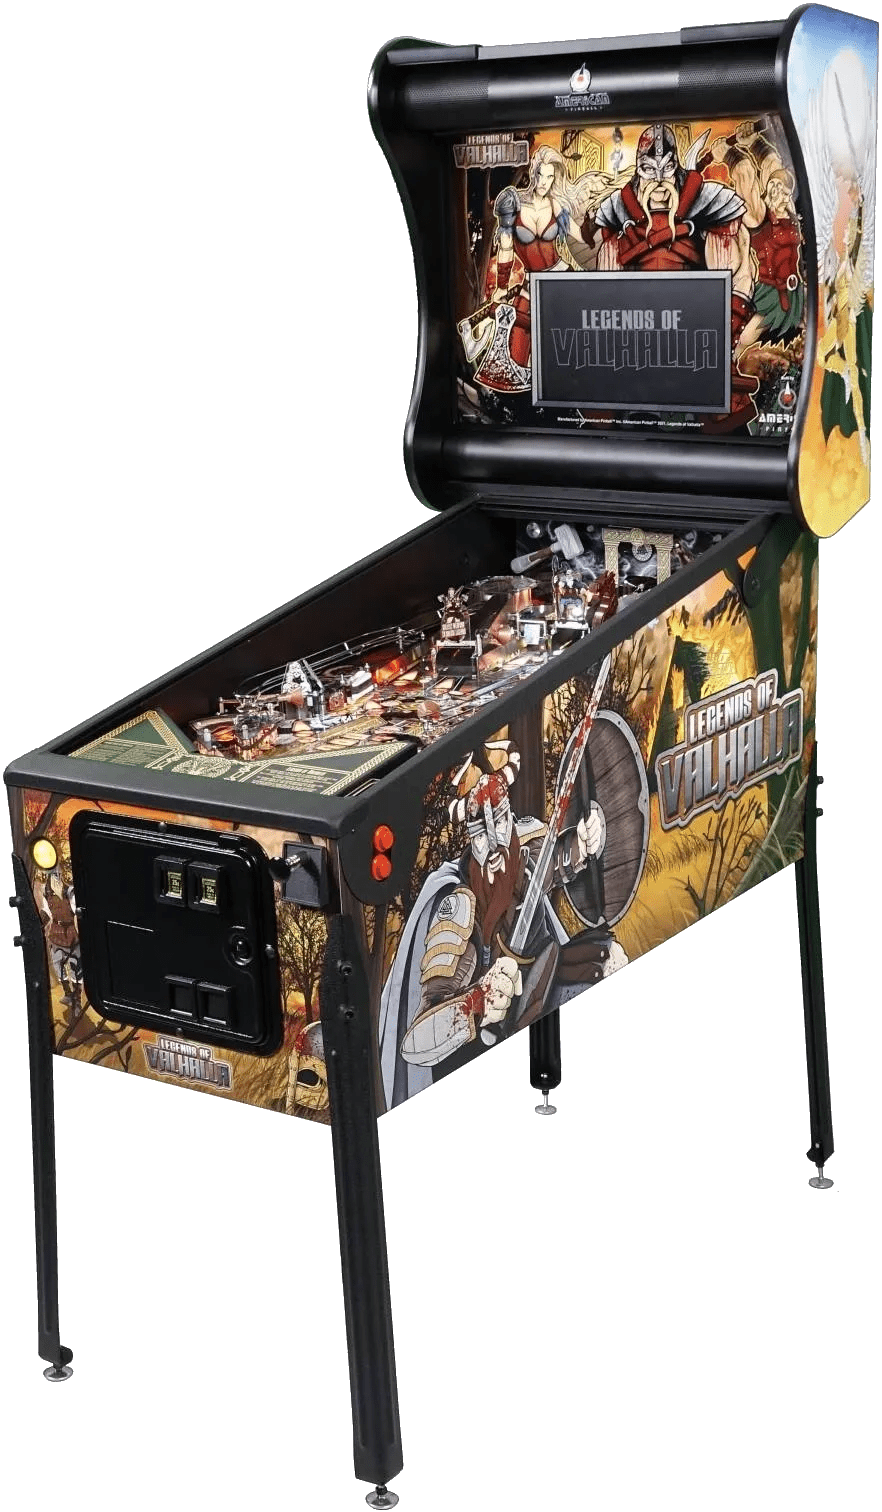 A pinball machine with the theme of indiana jones and the raiders of the lost ark.